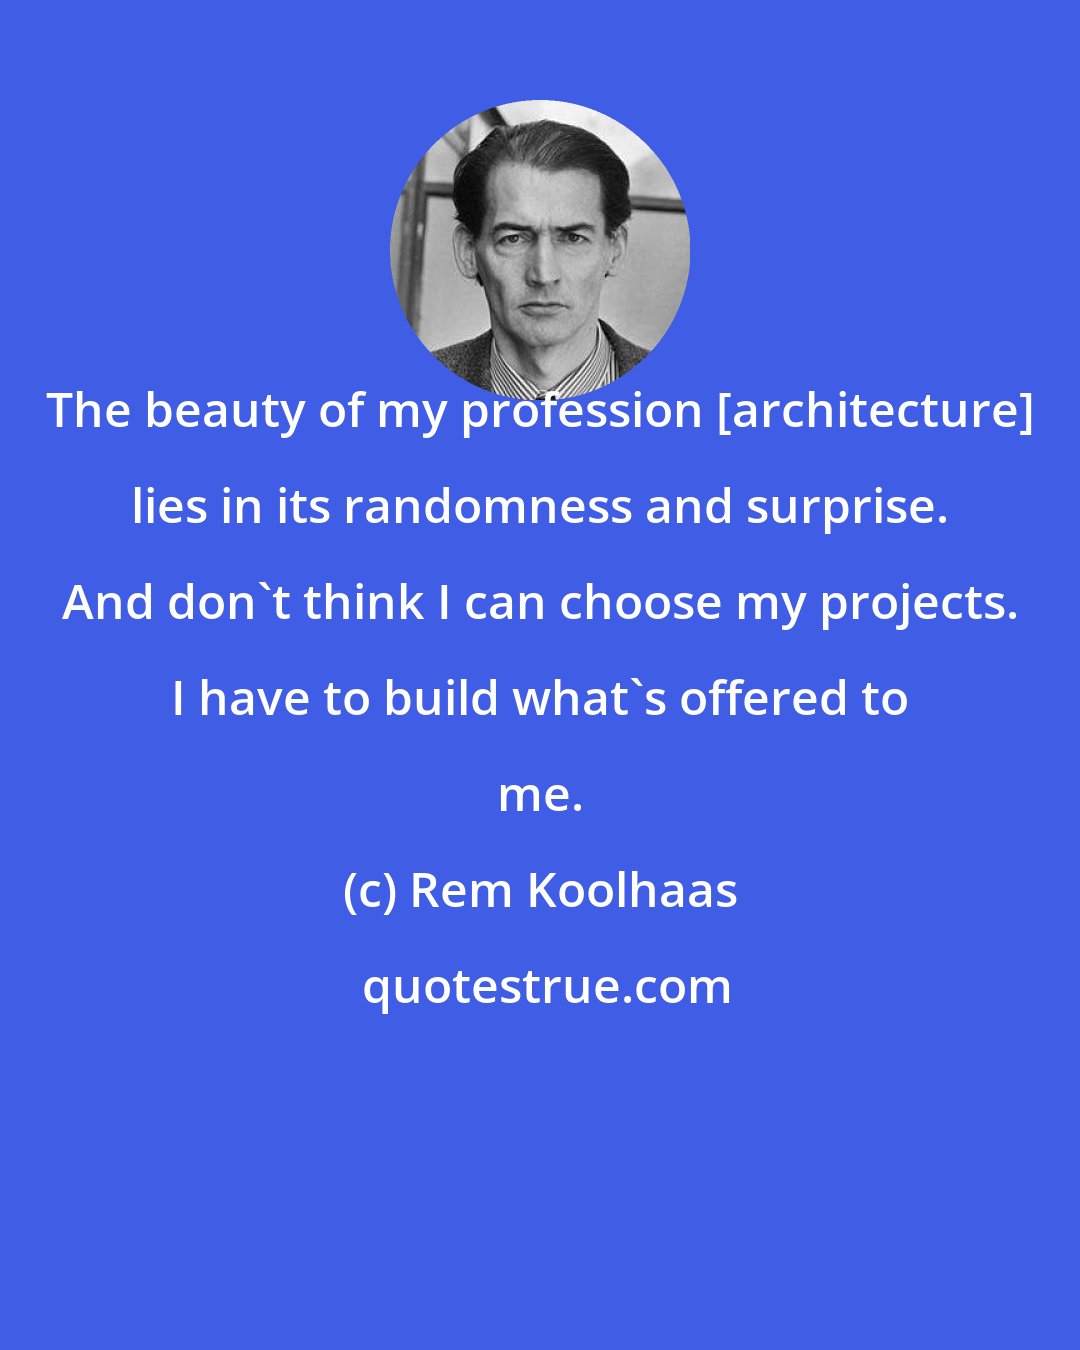 Rem Koolhaas: The beauty of my profession [architecture] lies in its randomness and surprise. And don't think I can choose my projects. I have to build what's offered to me.